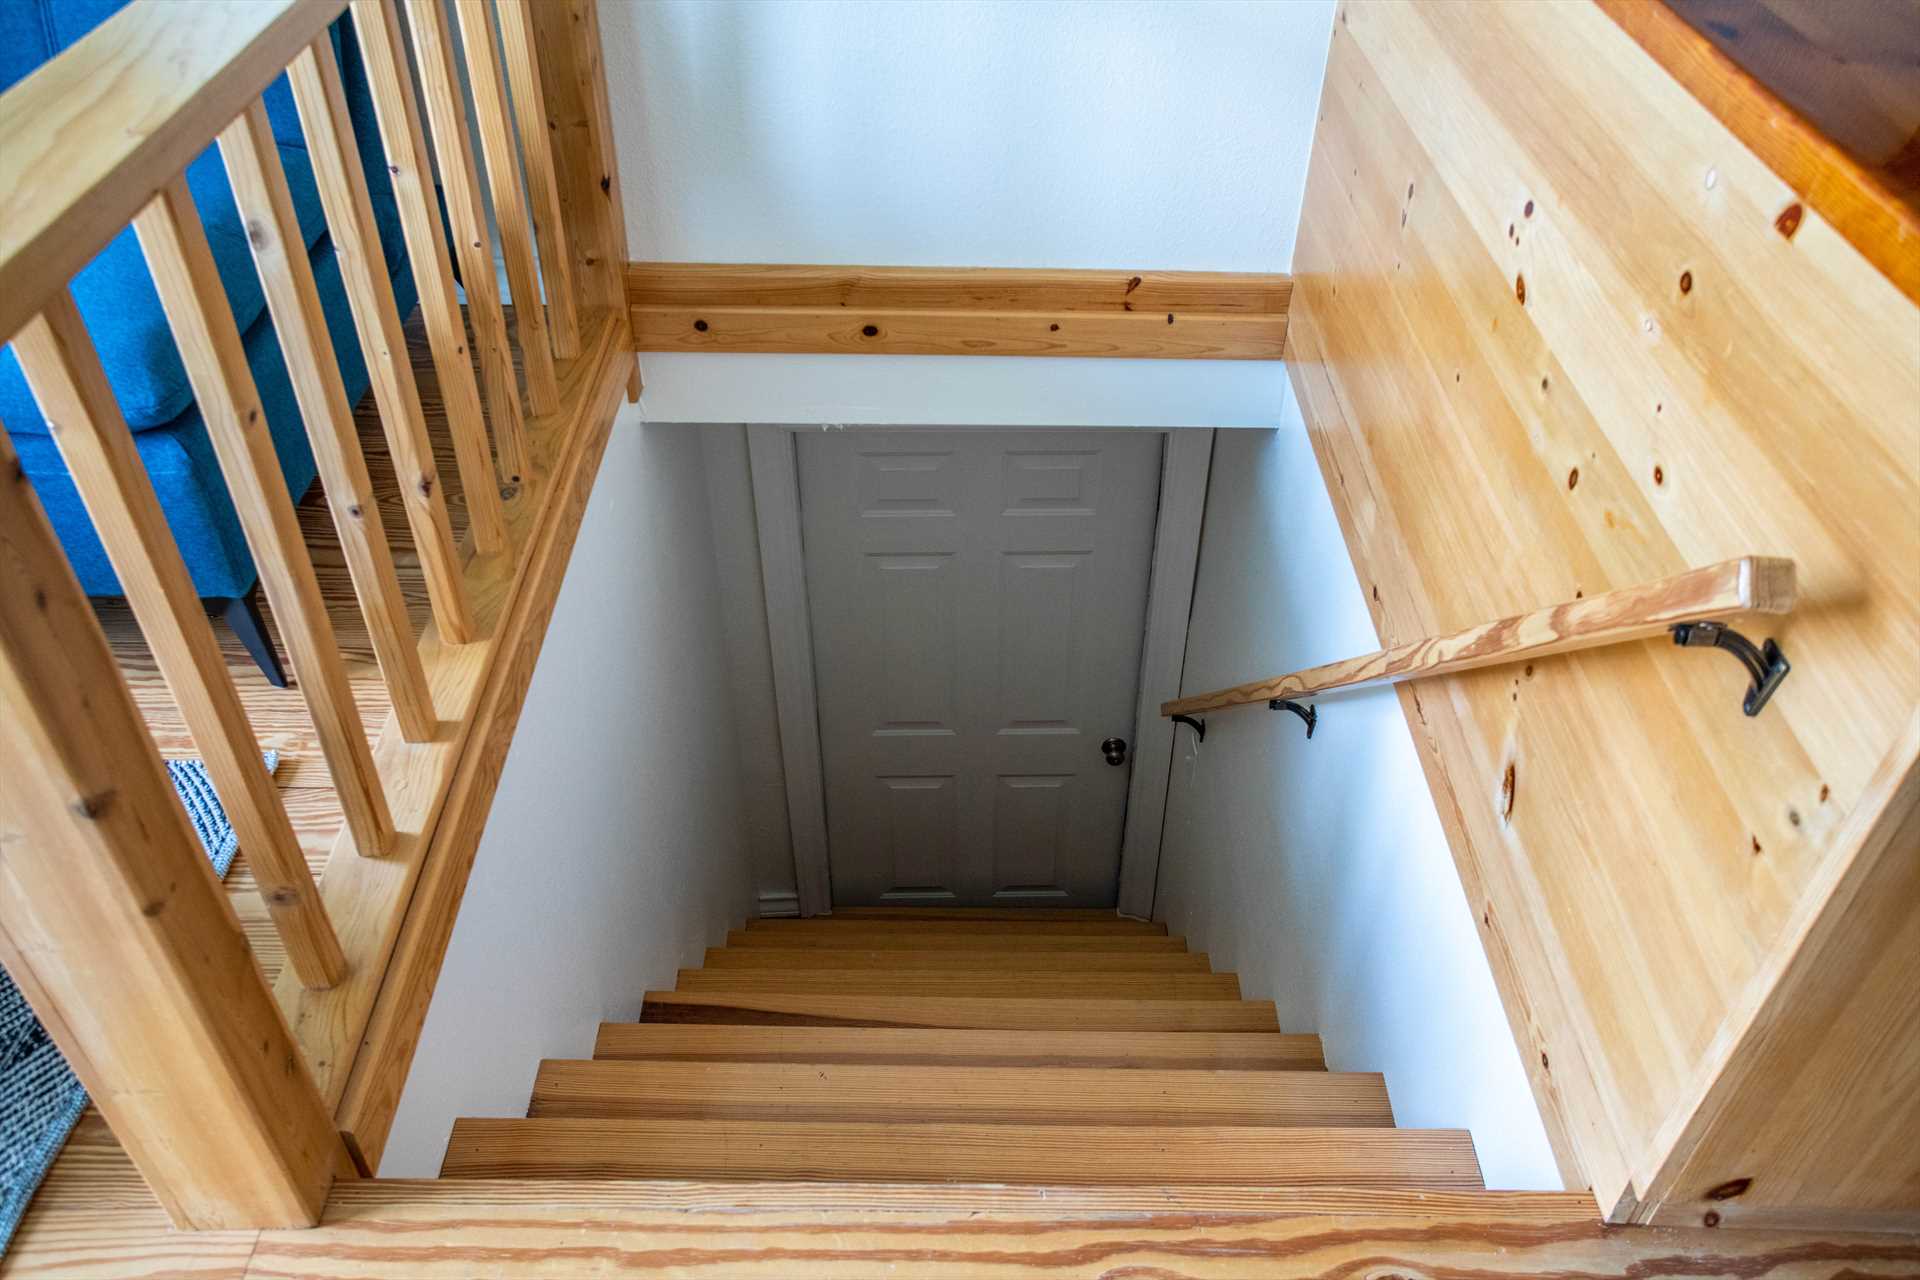                                                 Please be aware the optional suite is at the top of a moderately steep flight of stairs, and is therefore not recommended for guests with mobility issues.